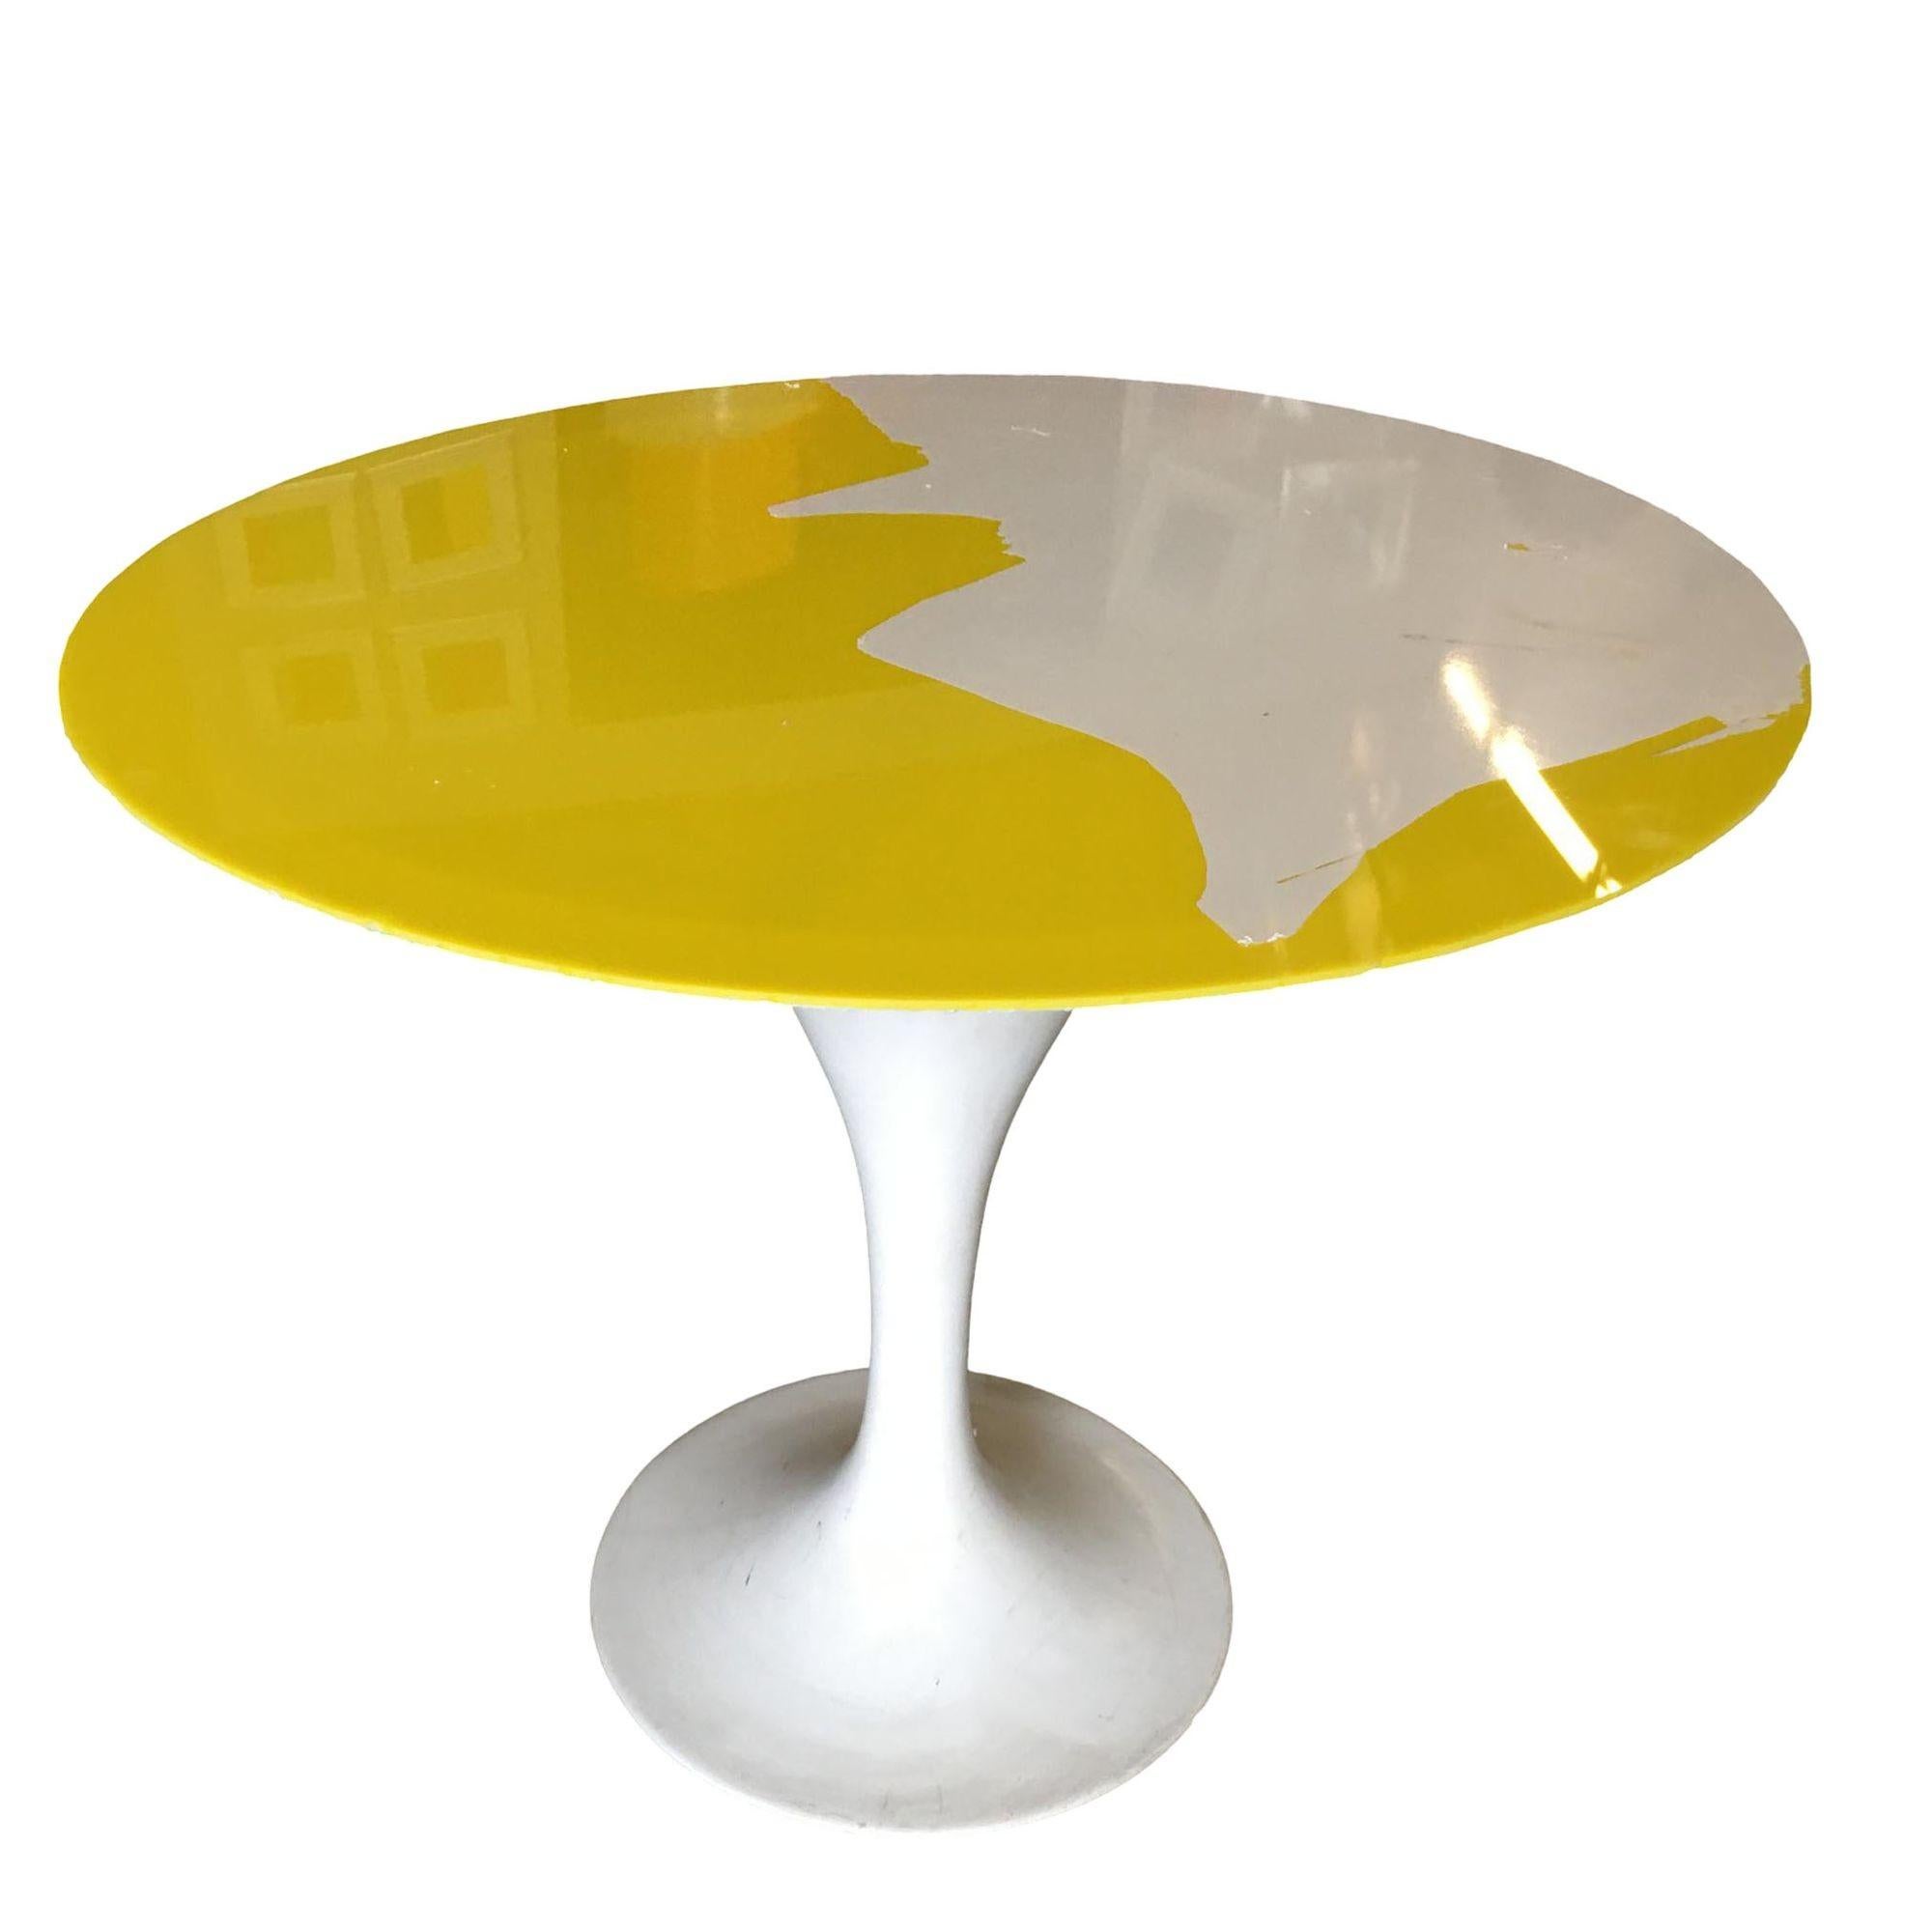 American Modernist Light Up Tulip Style Coffee Table For Sale